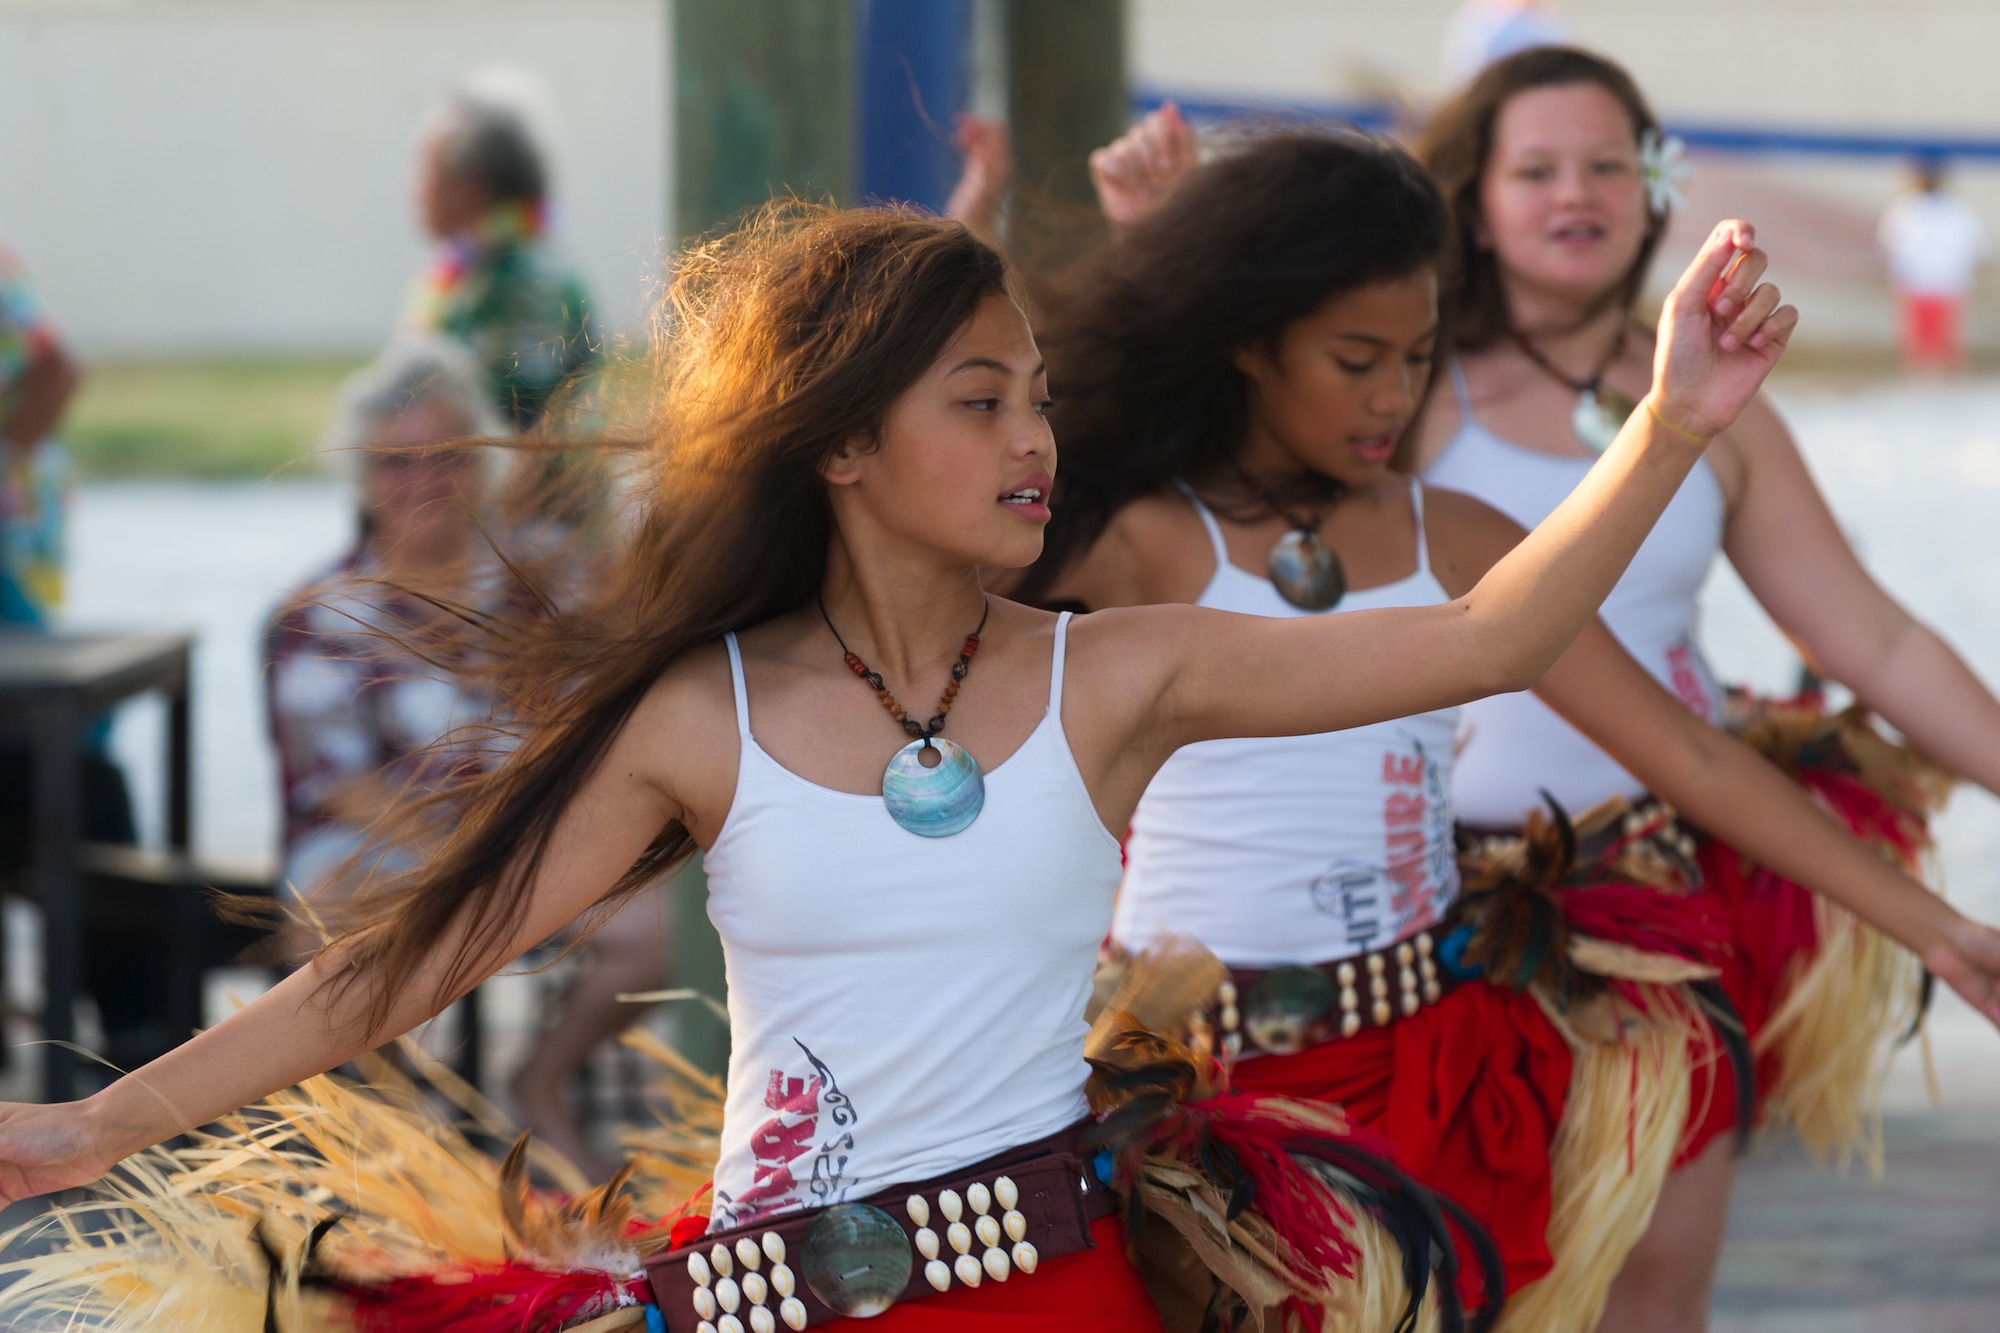 Students from Tahiti Tamure perform a Tahitian dance, at the Asian American and Pacific Islander Heritage Luau event held May 29, 2015 at the Beach House at Patrick Air Force Base, Fla. The Luau is part of an observance held annually from May 1 - 31 in celebration of Asian American and Pacific Islander Heritage Month. (U.S. Air Force photo/Cory Long) (Released)